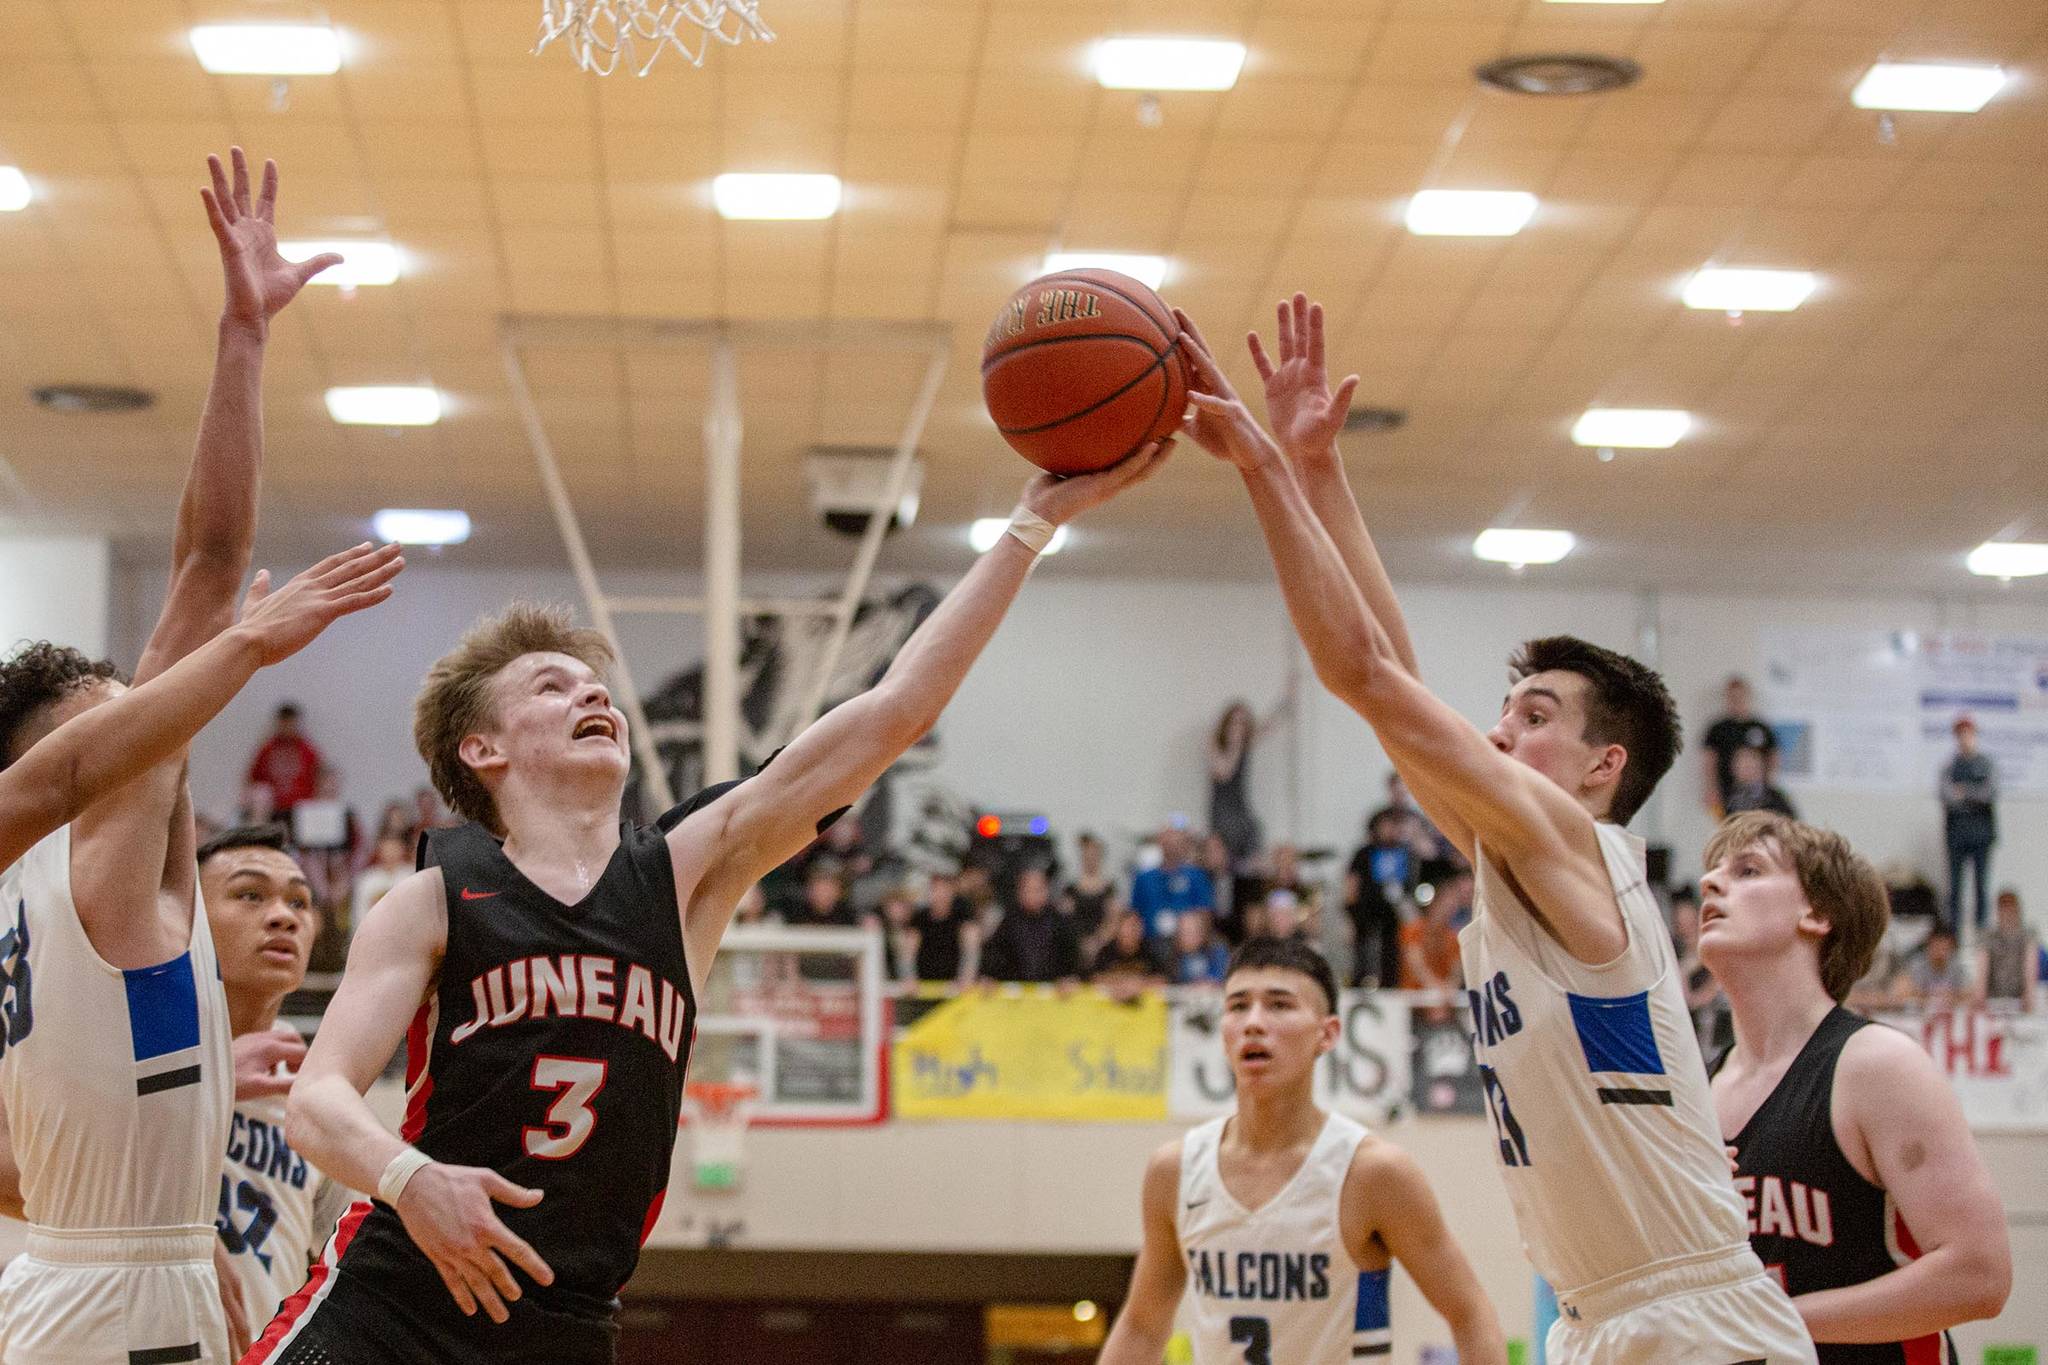 JDHS’ Austin McCurley drives to the hoop and is met by TMHS’ Braden Jenkins in a closely contested Region V tournament championship game between Juneau-Douglas High School: Yadaa.at Kalé and Thunder Mountain High School. (Courtesy Photo | Heather Holt)